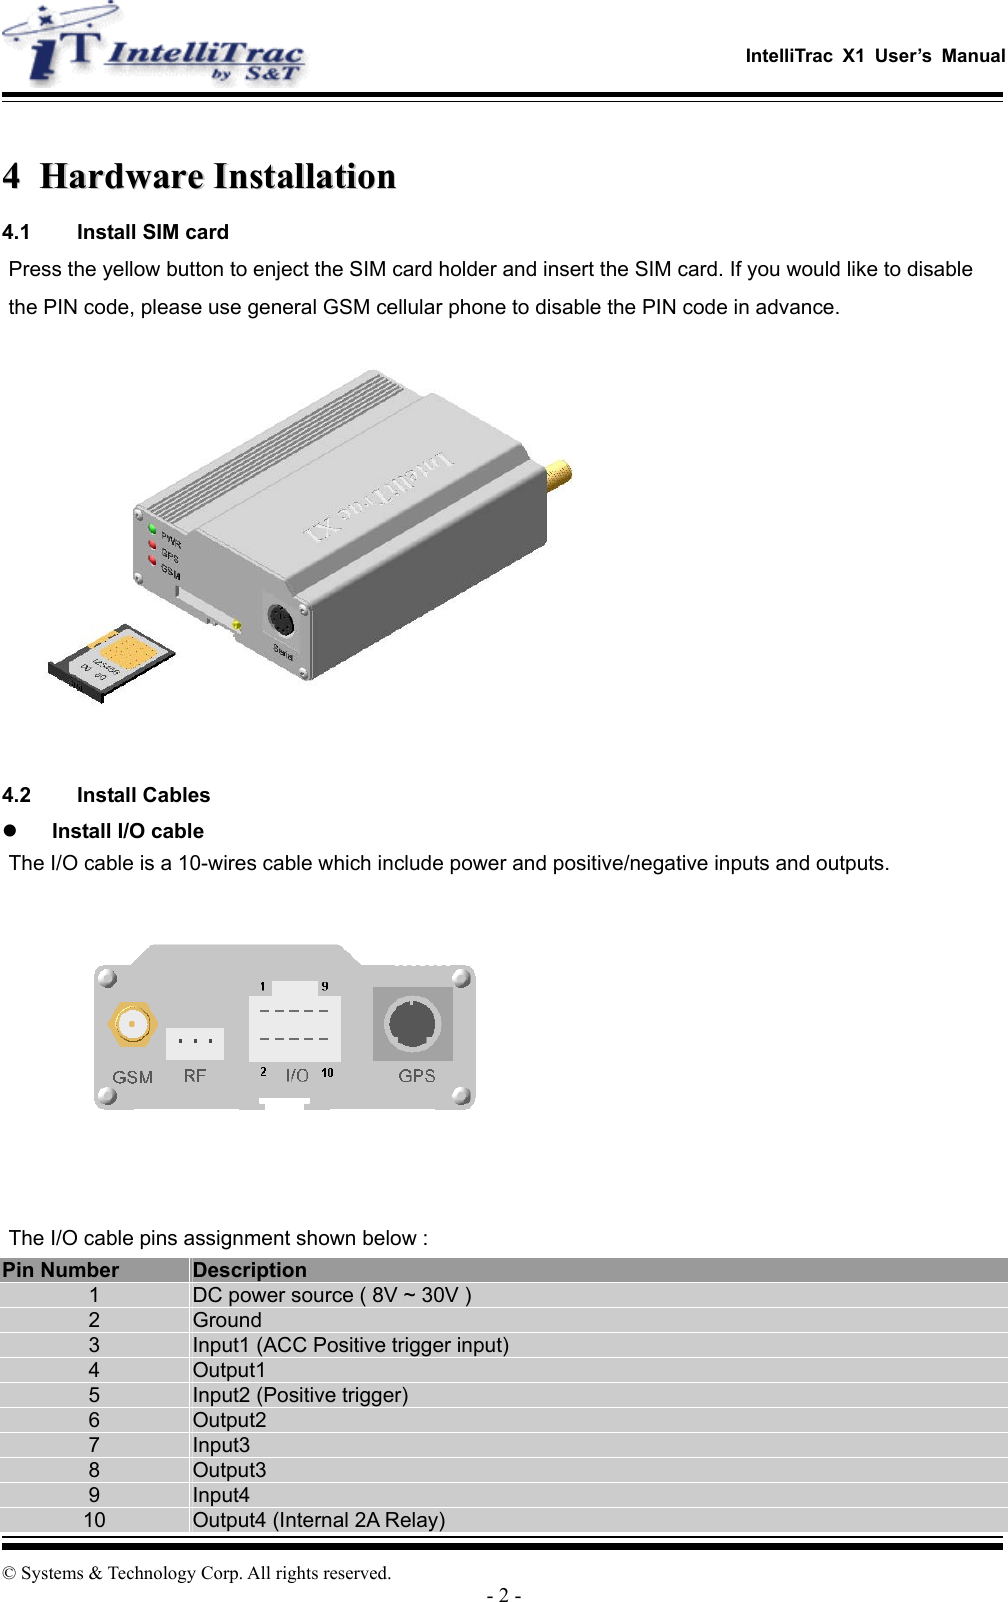   IntelliTrac X1 User’s Manual  © Systems &amp; Technology Corp. All rights reserved. - 2 -  44  HHaarrddwwaarree  IInnssttaallllaattiioonn  4.1  Install SIM card Press the yellow button to enject the SIM card holder and insert the SIM card. If you would like to disable the PIN code, please use general GSM cellular phone to disable the PIN code in advance.   4.2 Install Cables   Install I/O cable The I/O cable is a 10-wires cable which include power and positive/negative inputs and outputs.  The I/O cable pins assignment shown below : Pin Number  Description 1  DC power source ( 8V ~ 30V ) 2  Ground 3  Input1 (ACC Positive trigger input) 4  Output1 5  Input2 (Positive trigger) 6  Output2 7  Input3 8  Output3 9  Input4 10  Output4 (Internal 2A Relay) 